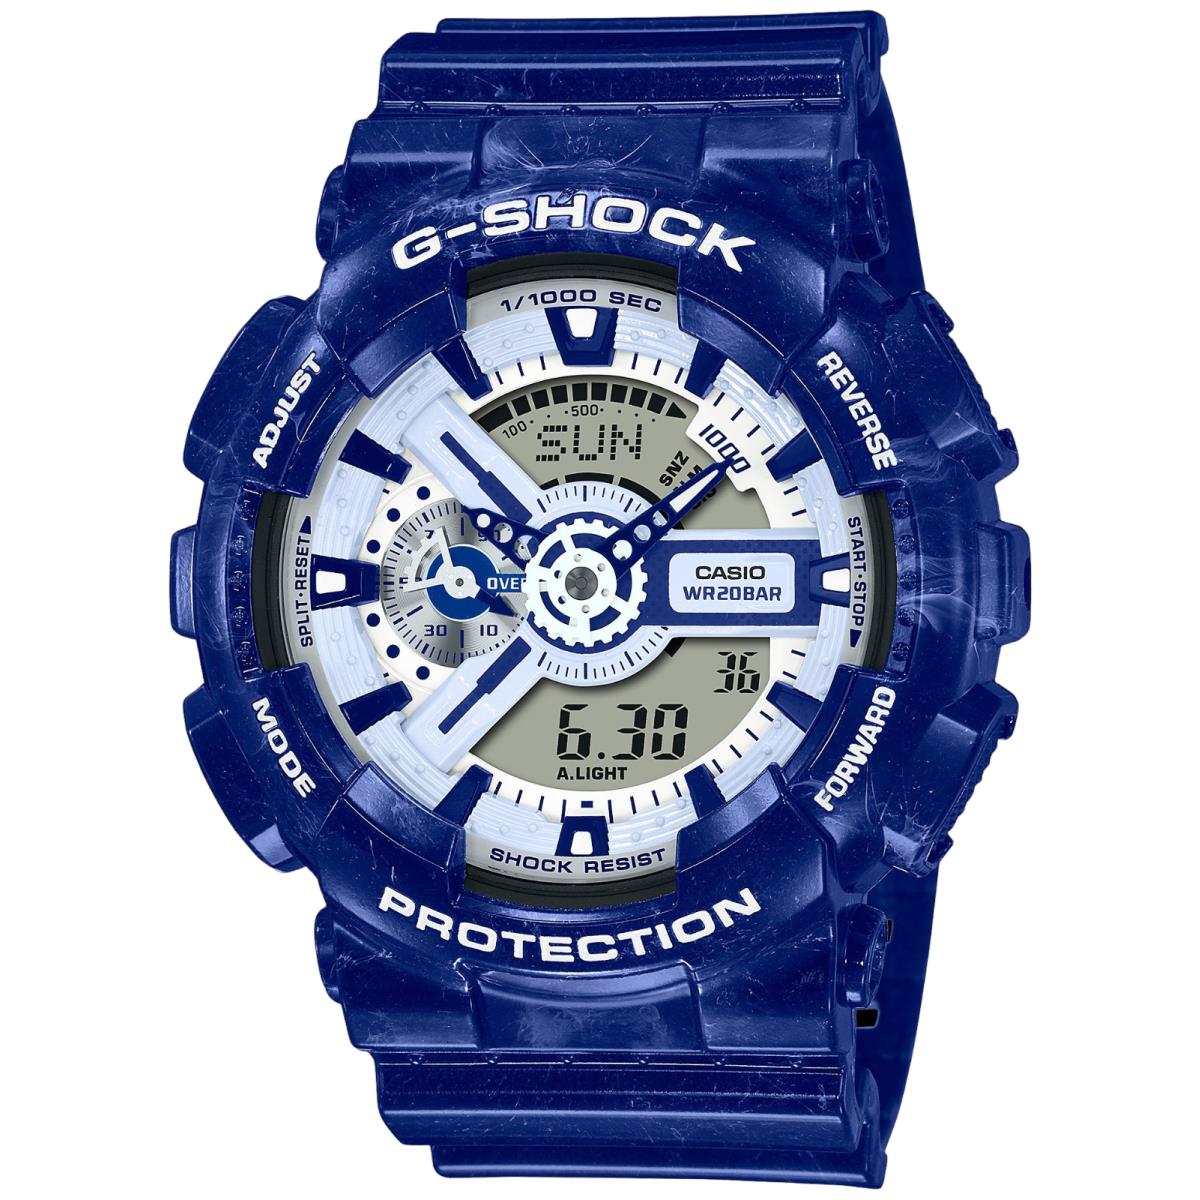 Casio G-shock GA110BWP-2A Blue and White Chinese Porcelain Ceramic Dragon Watch - Dial: Blue, Band: White, Bezel: White